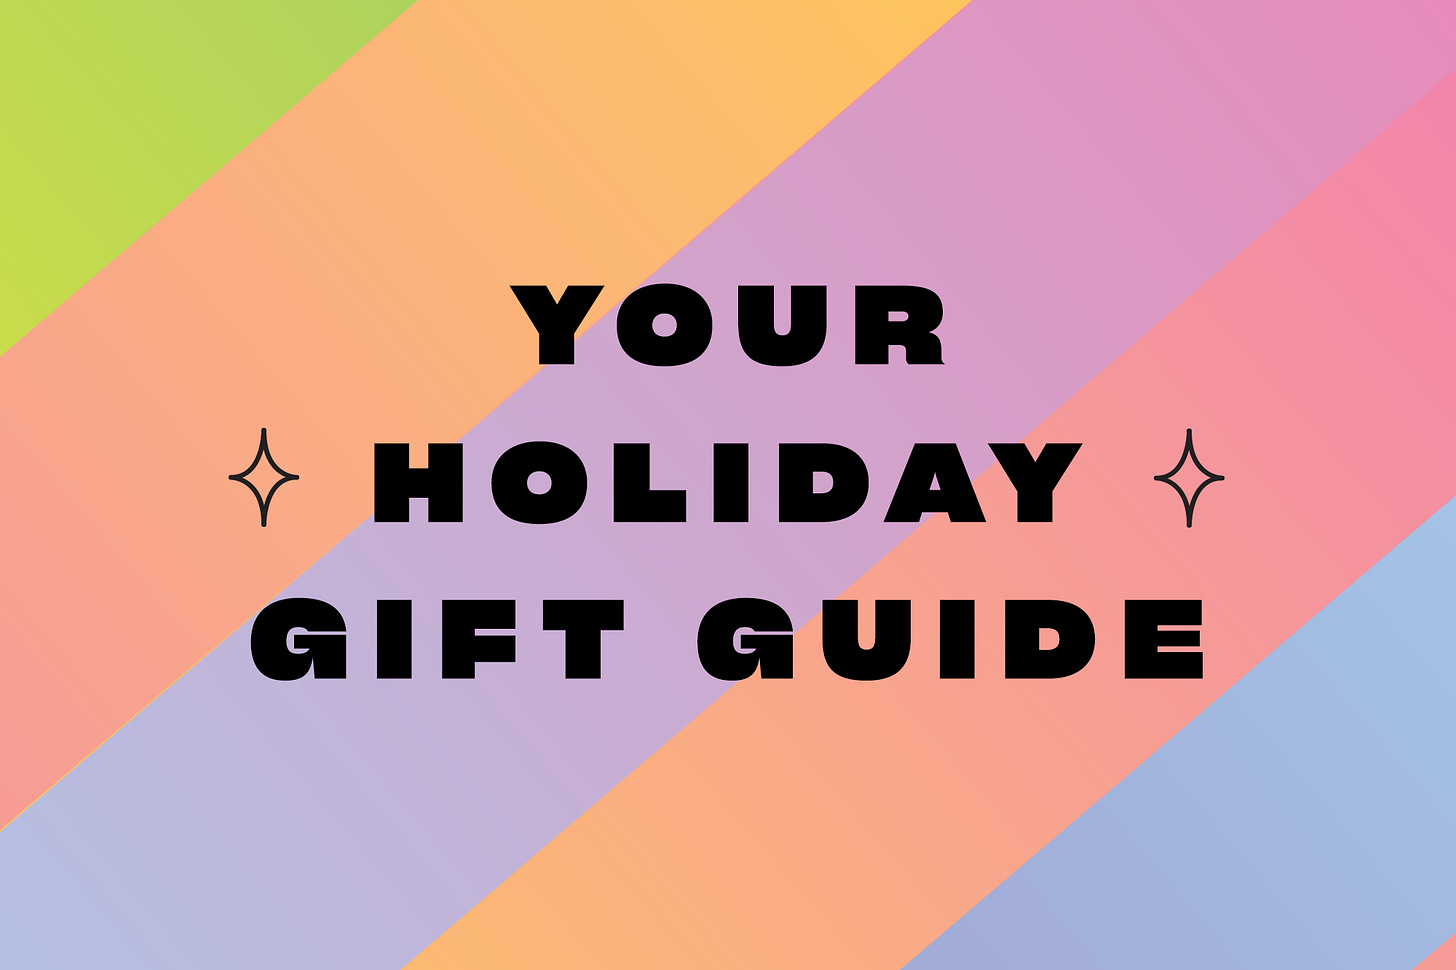 EW's Holiday Gift Guide 2020: We pick the season's best gifts | EW.com